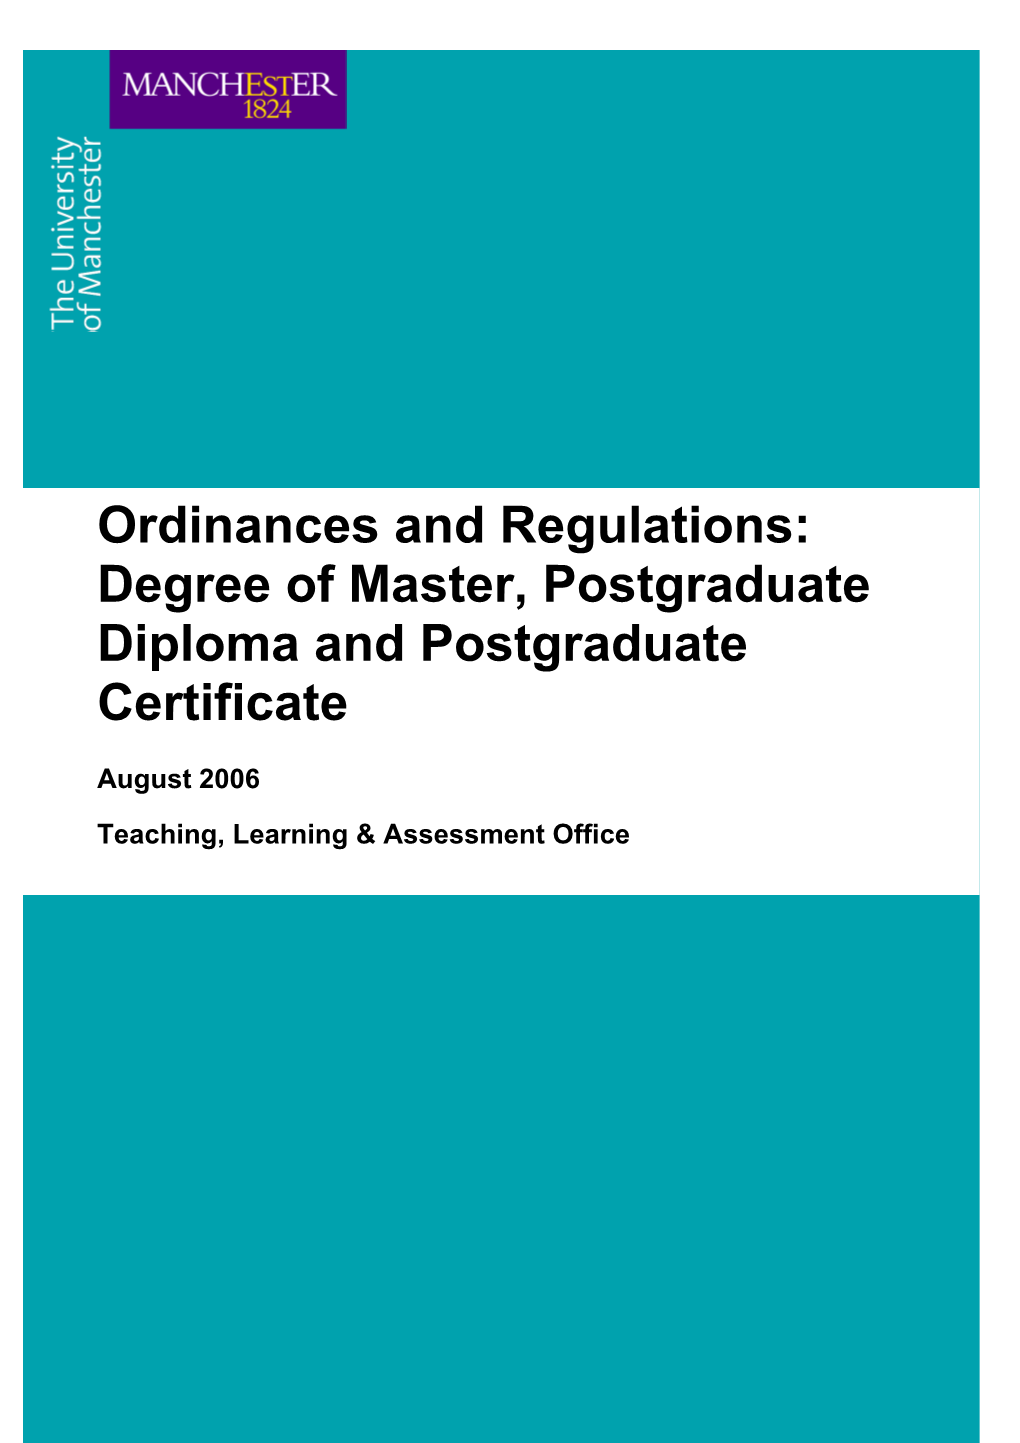 Ordinances and Regulations for the Degrees of Master, Postgraduate Diploma and Postgraduate